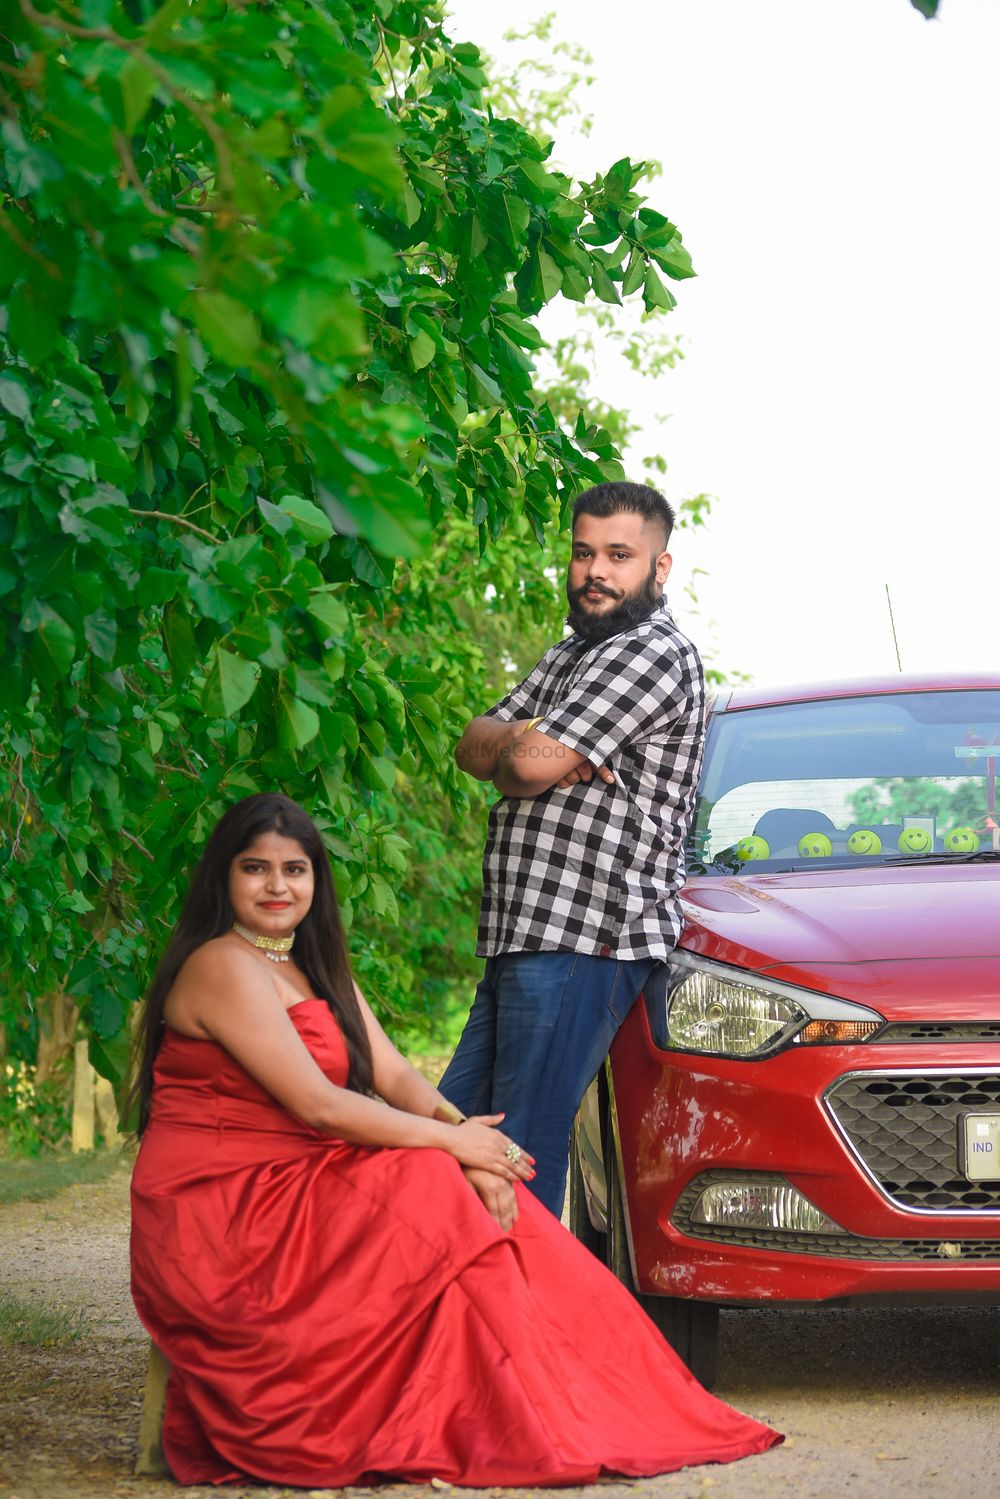 Photo From Kirti & Harsh - By Khush Photography